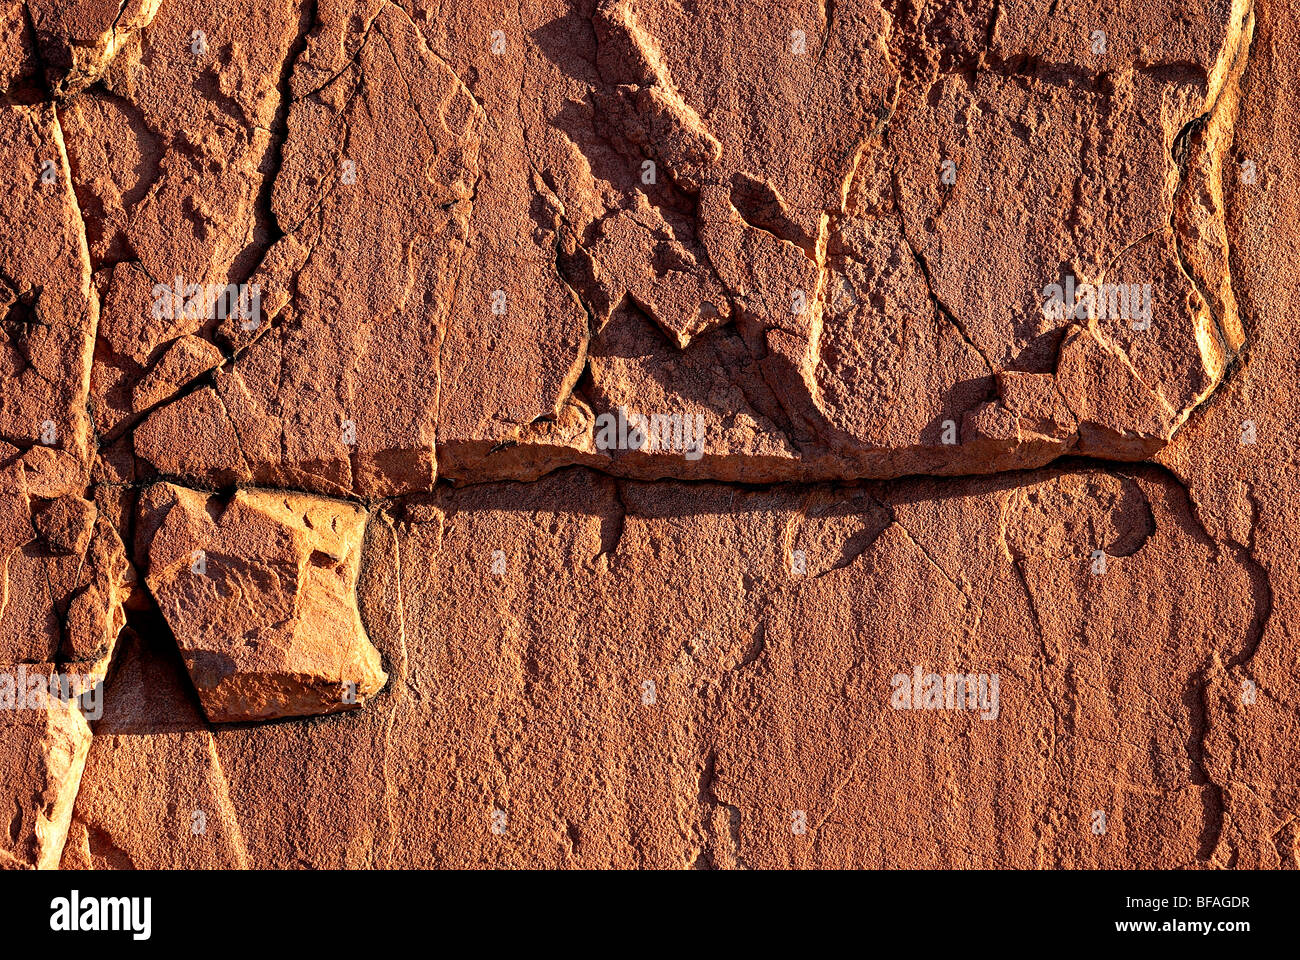 Rocks, texture, rock, stone, rock formation, brown, red, stones, striation, rock veins, veins, close-up, rough, close up Stock Photo